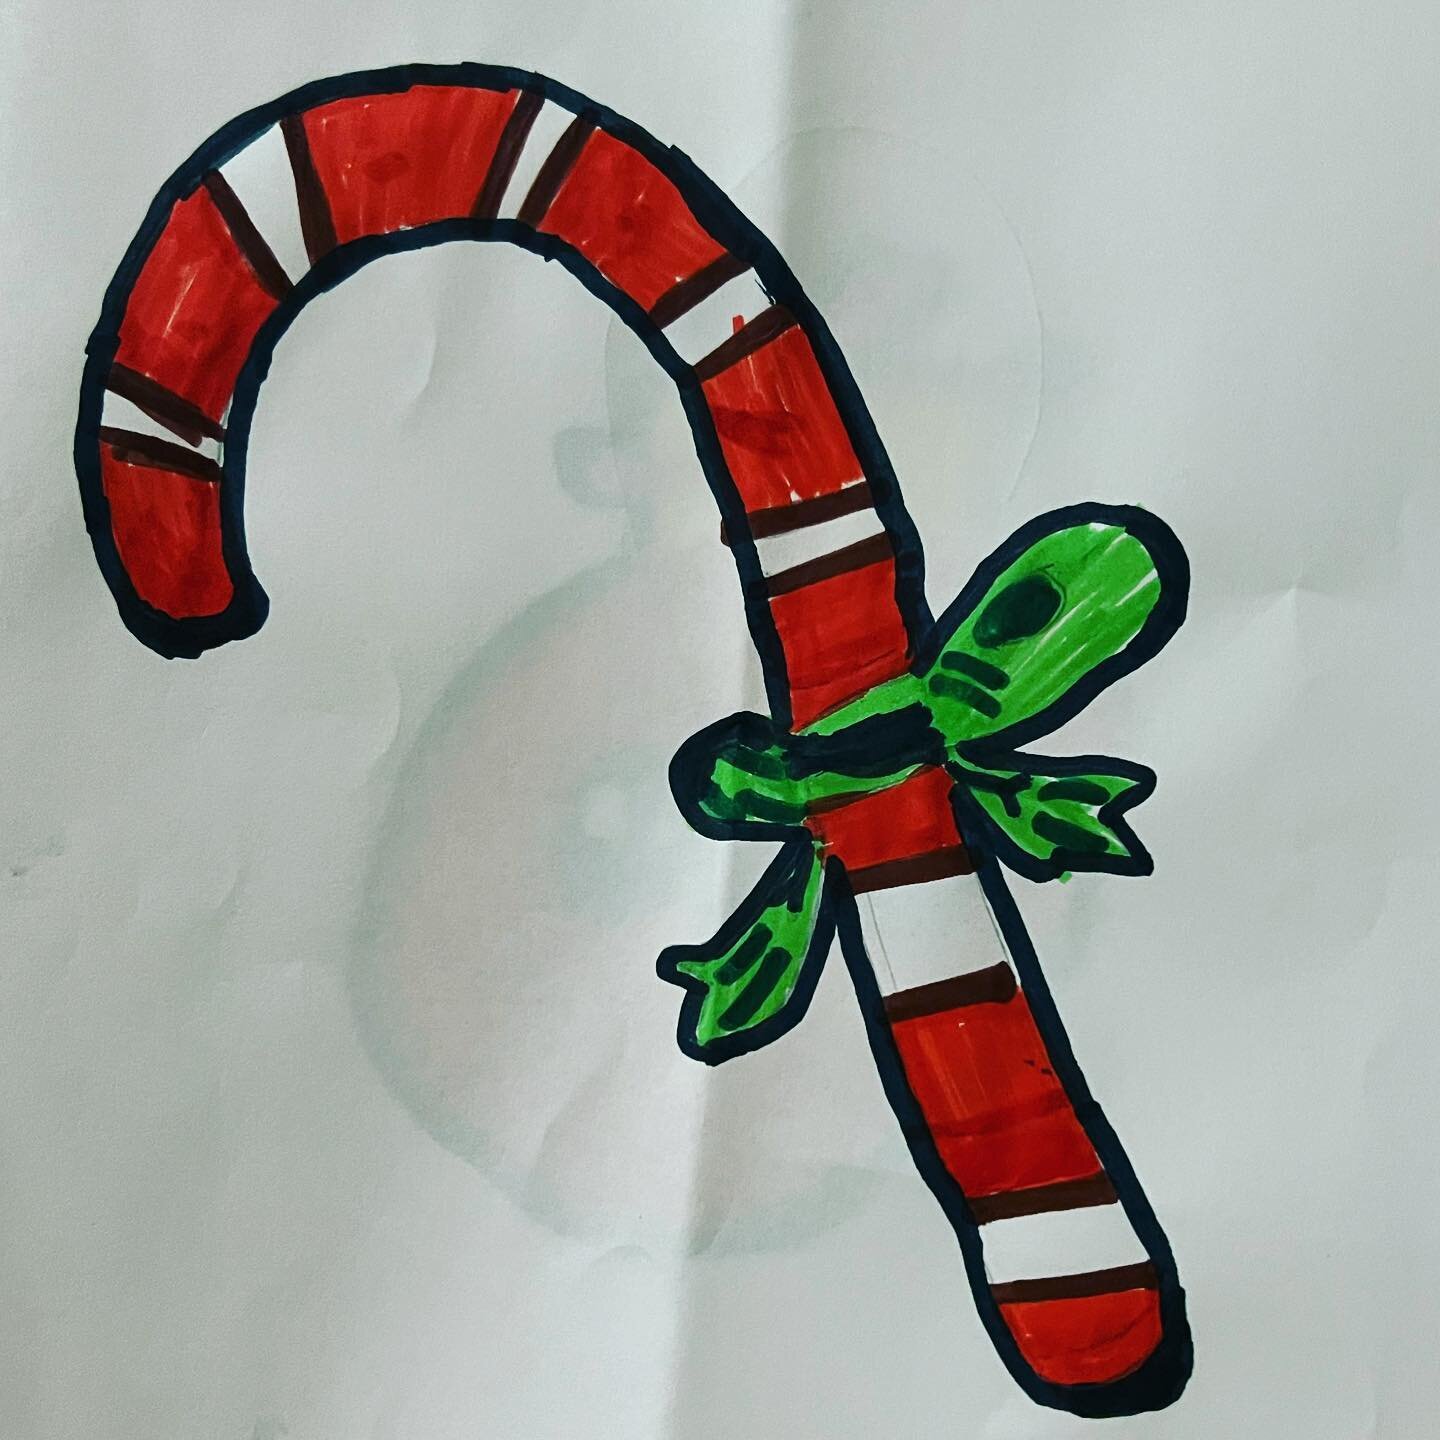 &hearts;️
Look at this lovely candy cane my girl drew!

She&rsquo;s been practicing Christmas drawings and is getting ready to make Christmas cards for all her school friends.

At the same time, I&rsquo;m madly drawing, cutting, sticking, clicking an